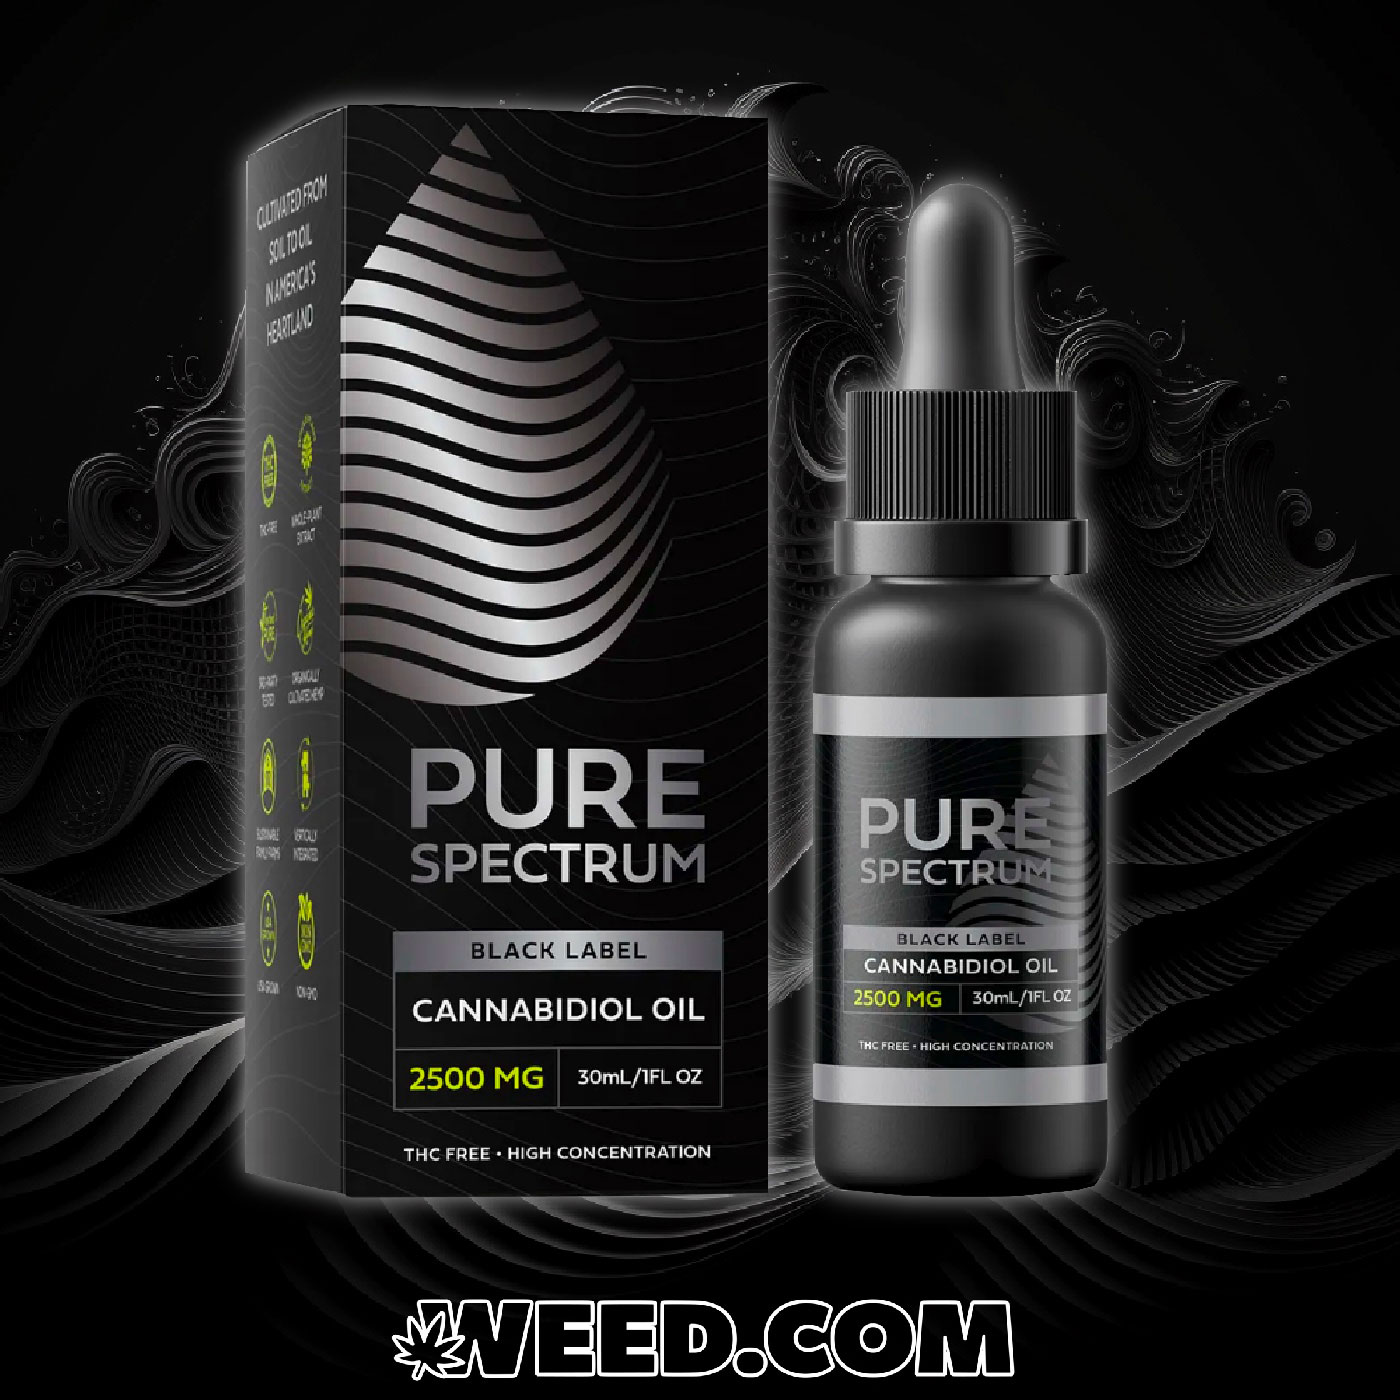 CBD Oil 2500mg Pure Spectrum on Black Waves Background with Weed.com Logo